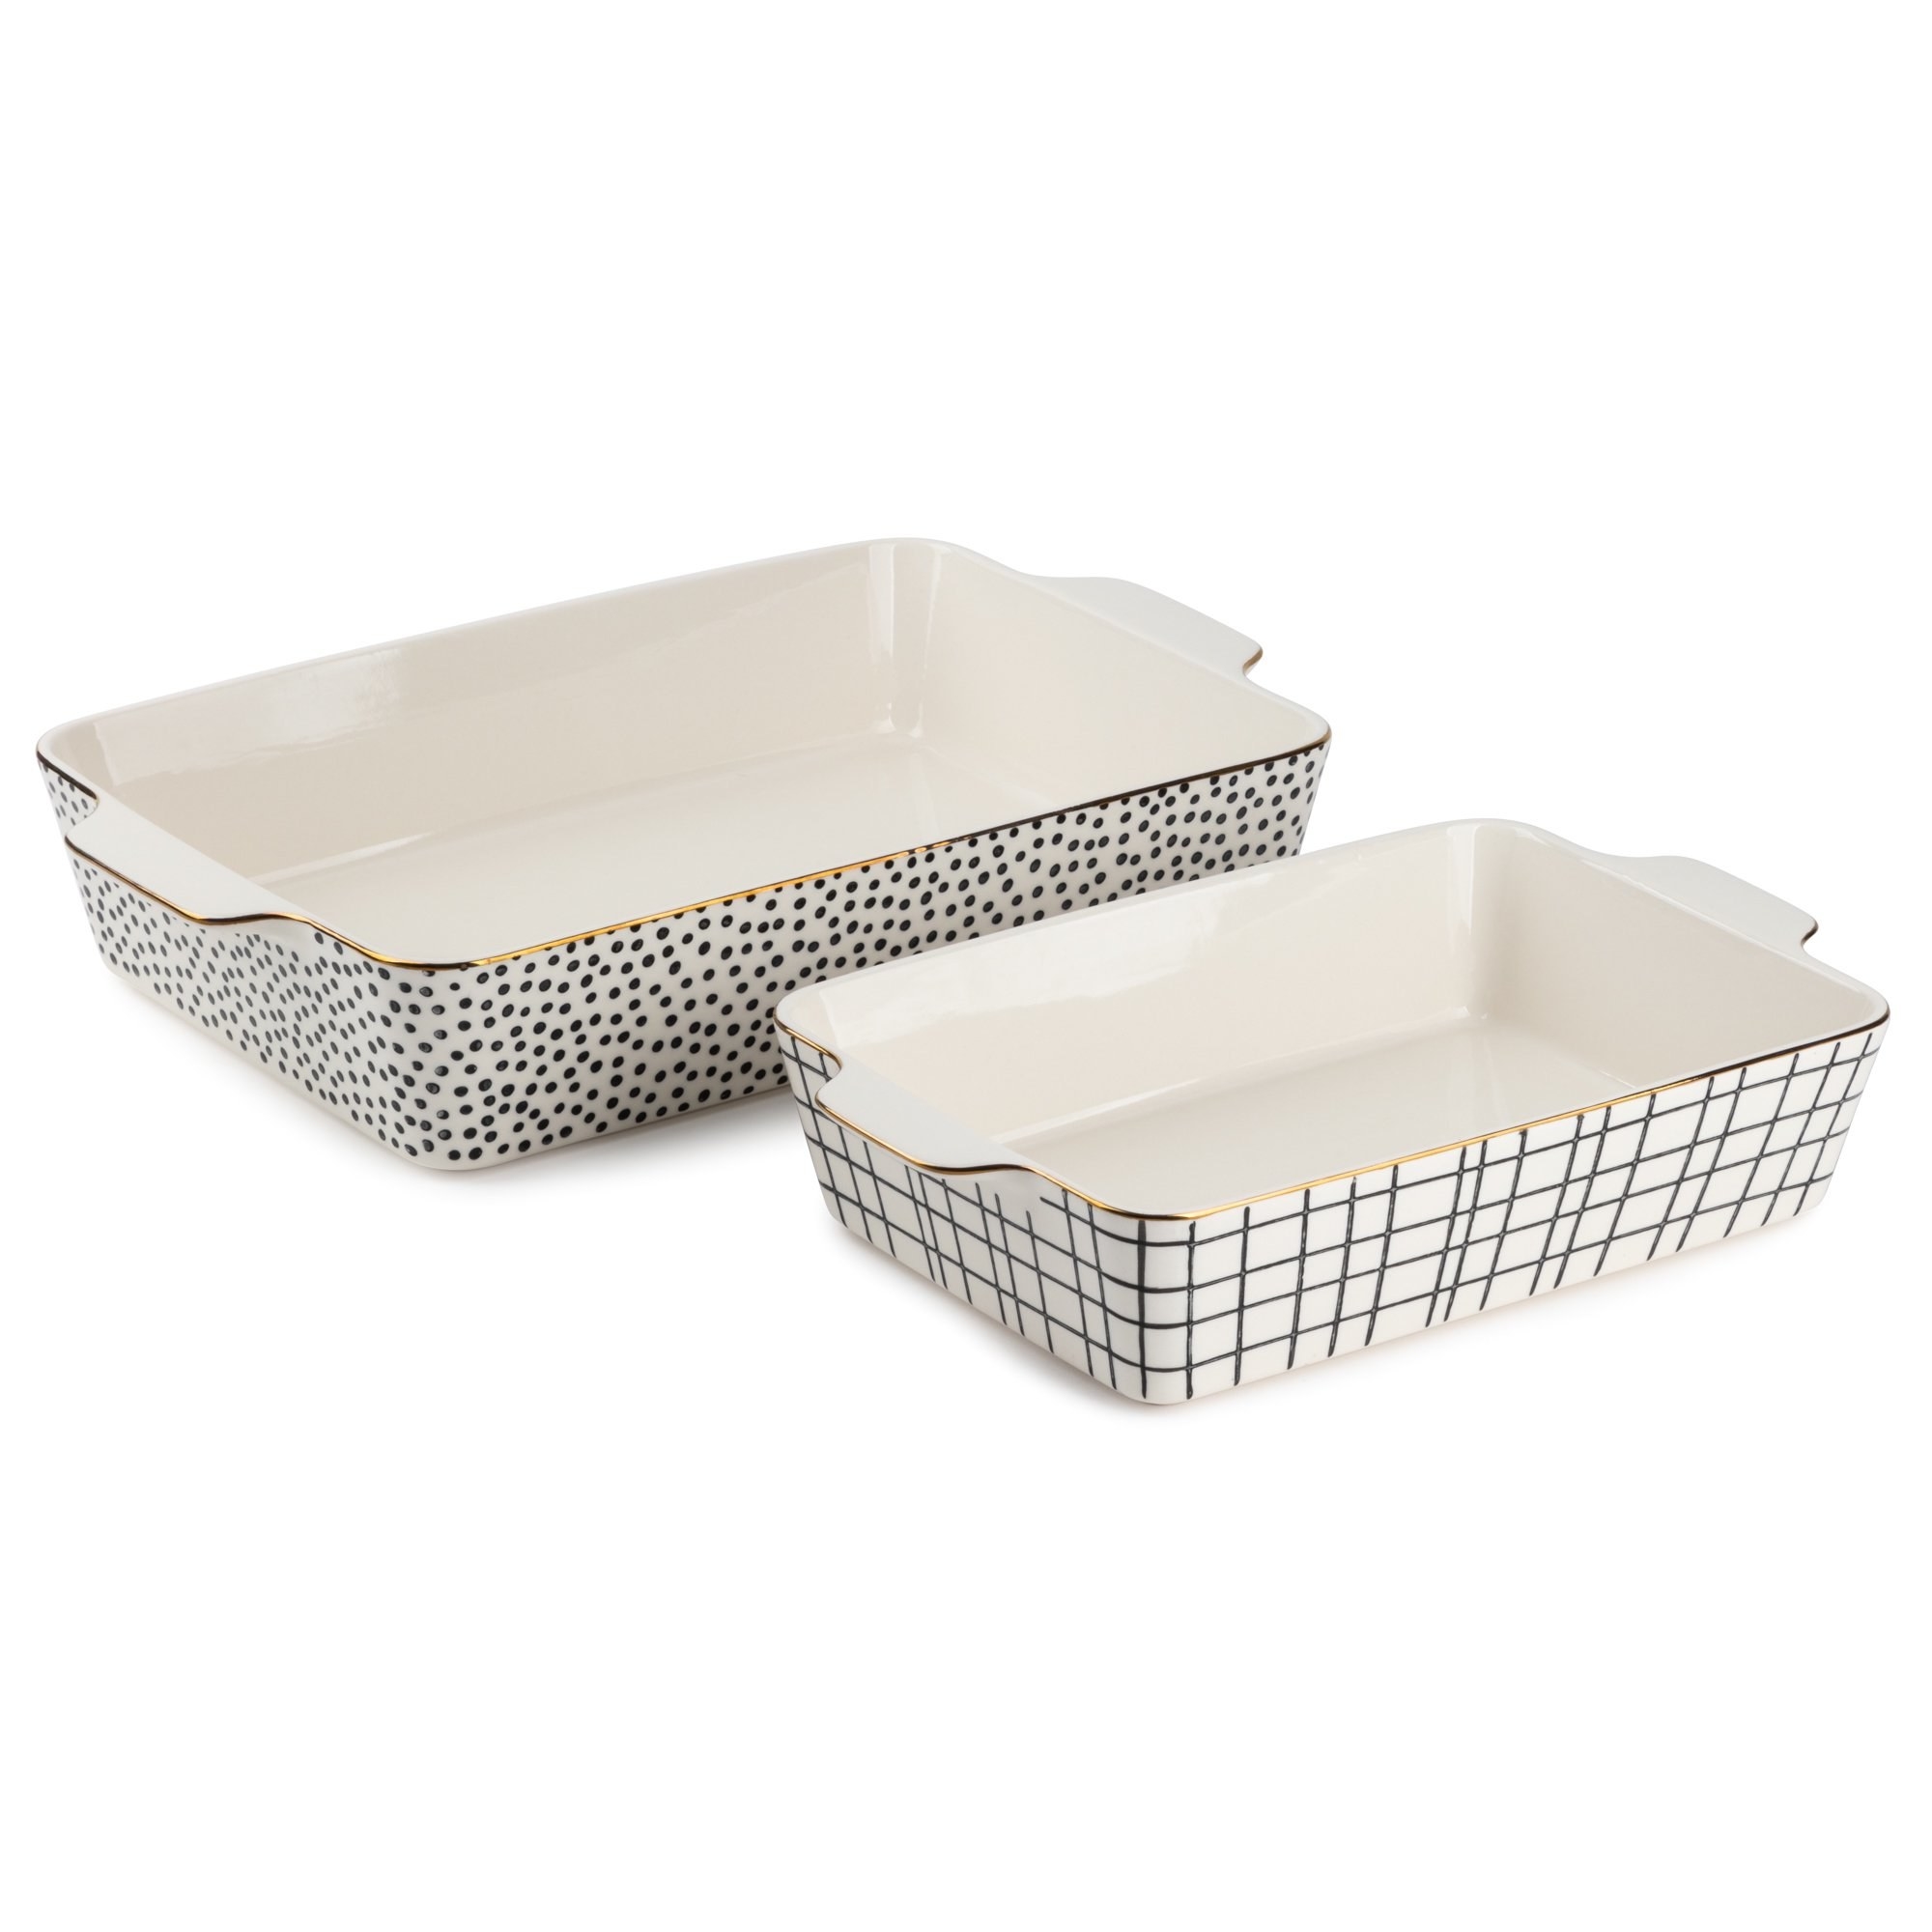 A gold-rimmed, dotted casserole dish measuring 13&quot; x 9&quot; sits behind a complementary gold-rimmed, cross-lined casserole dish measuring 10.2&quot; x 7.2&quot;